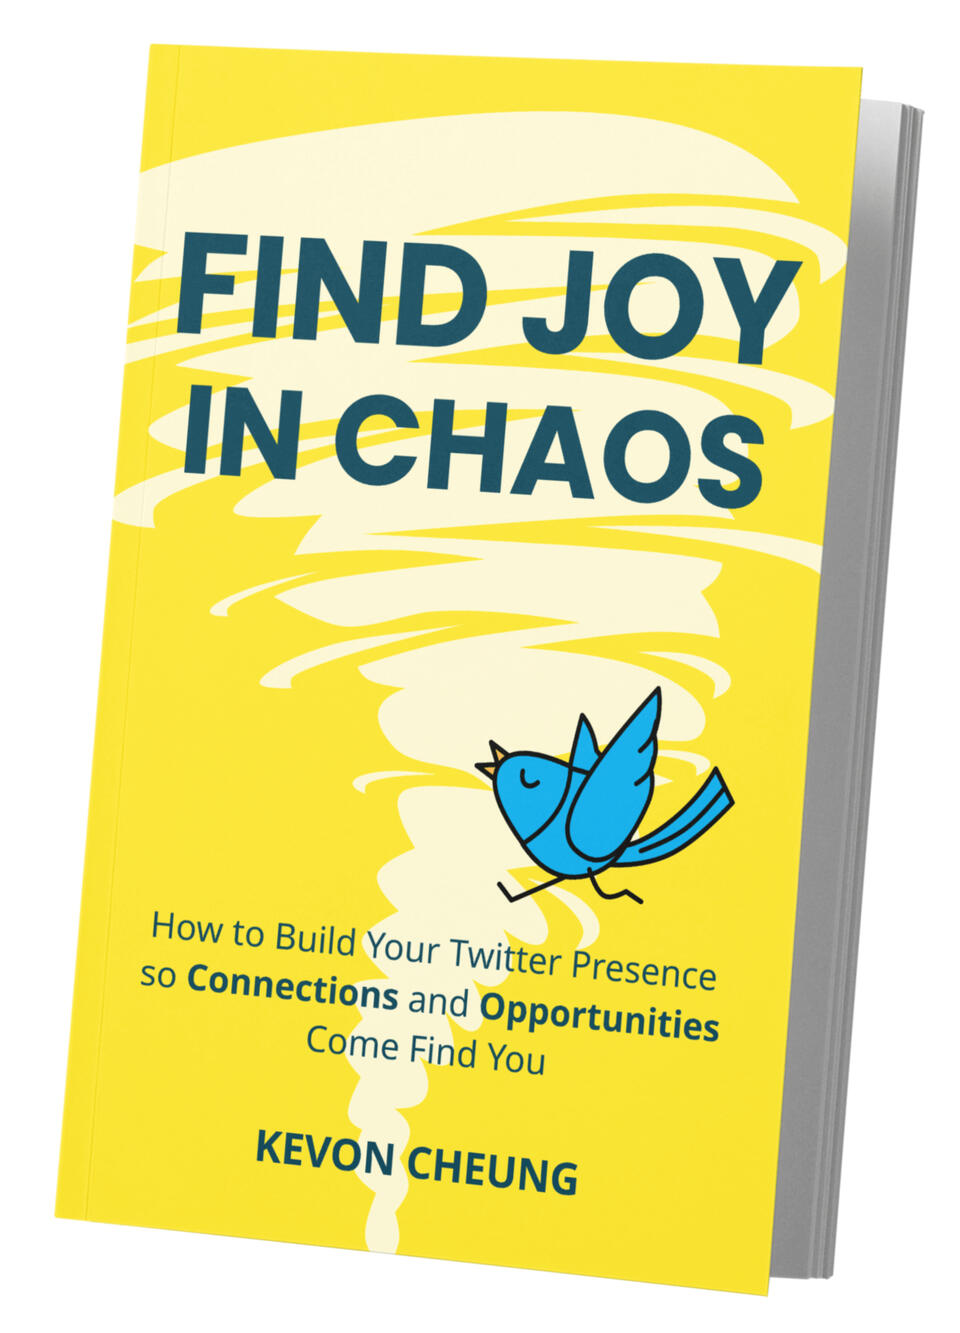 A Twitter Book: Find Joy in Chaos